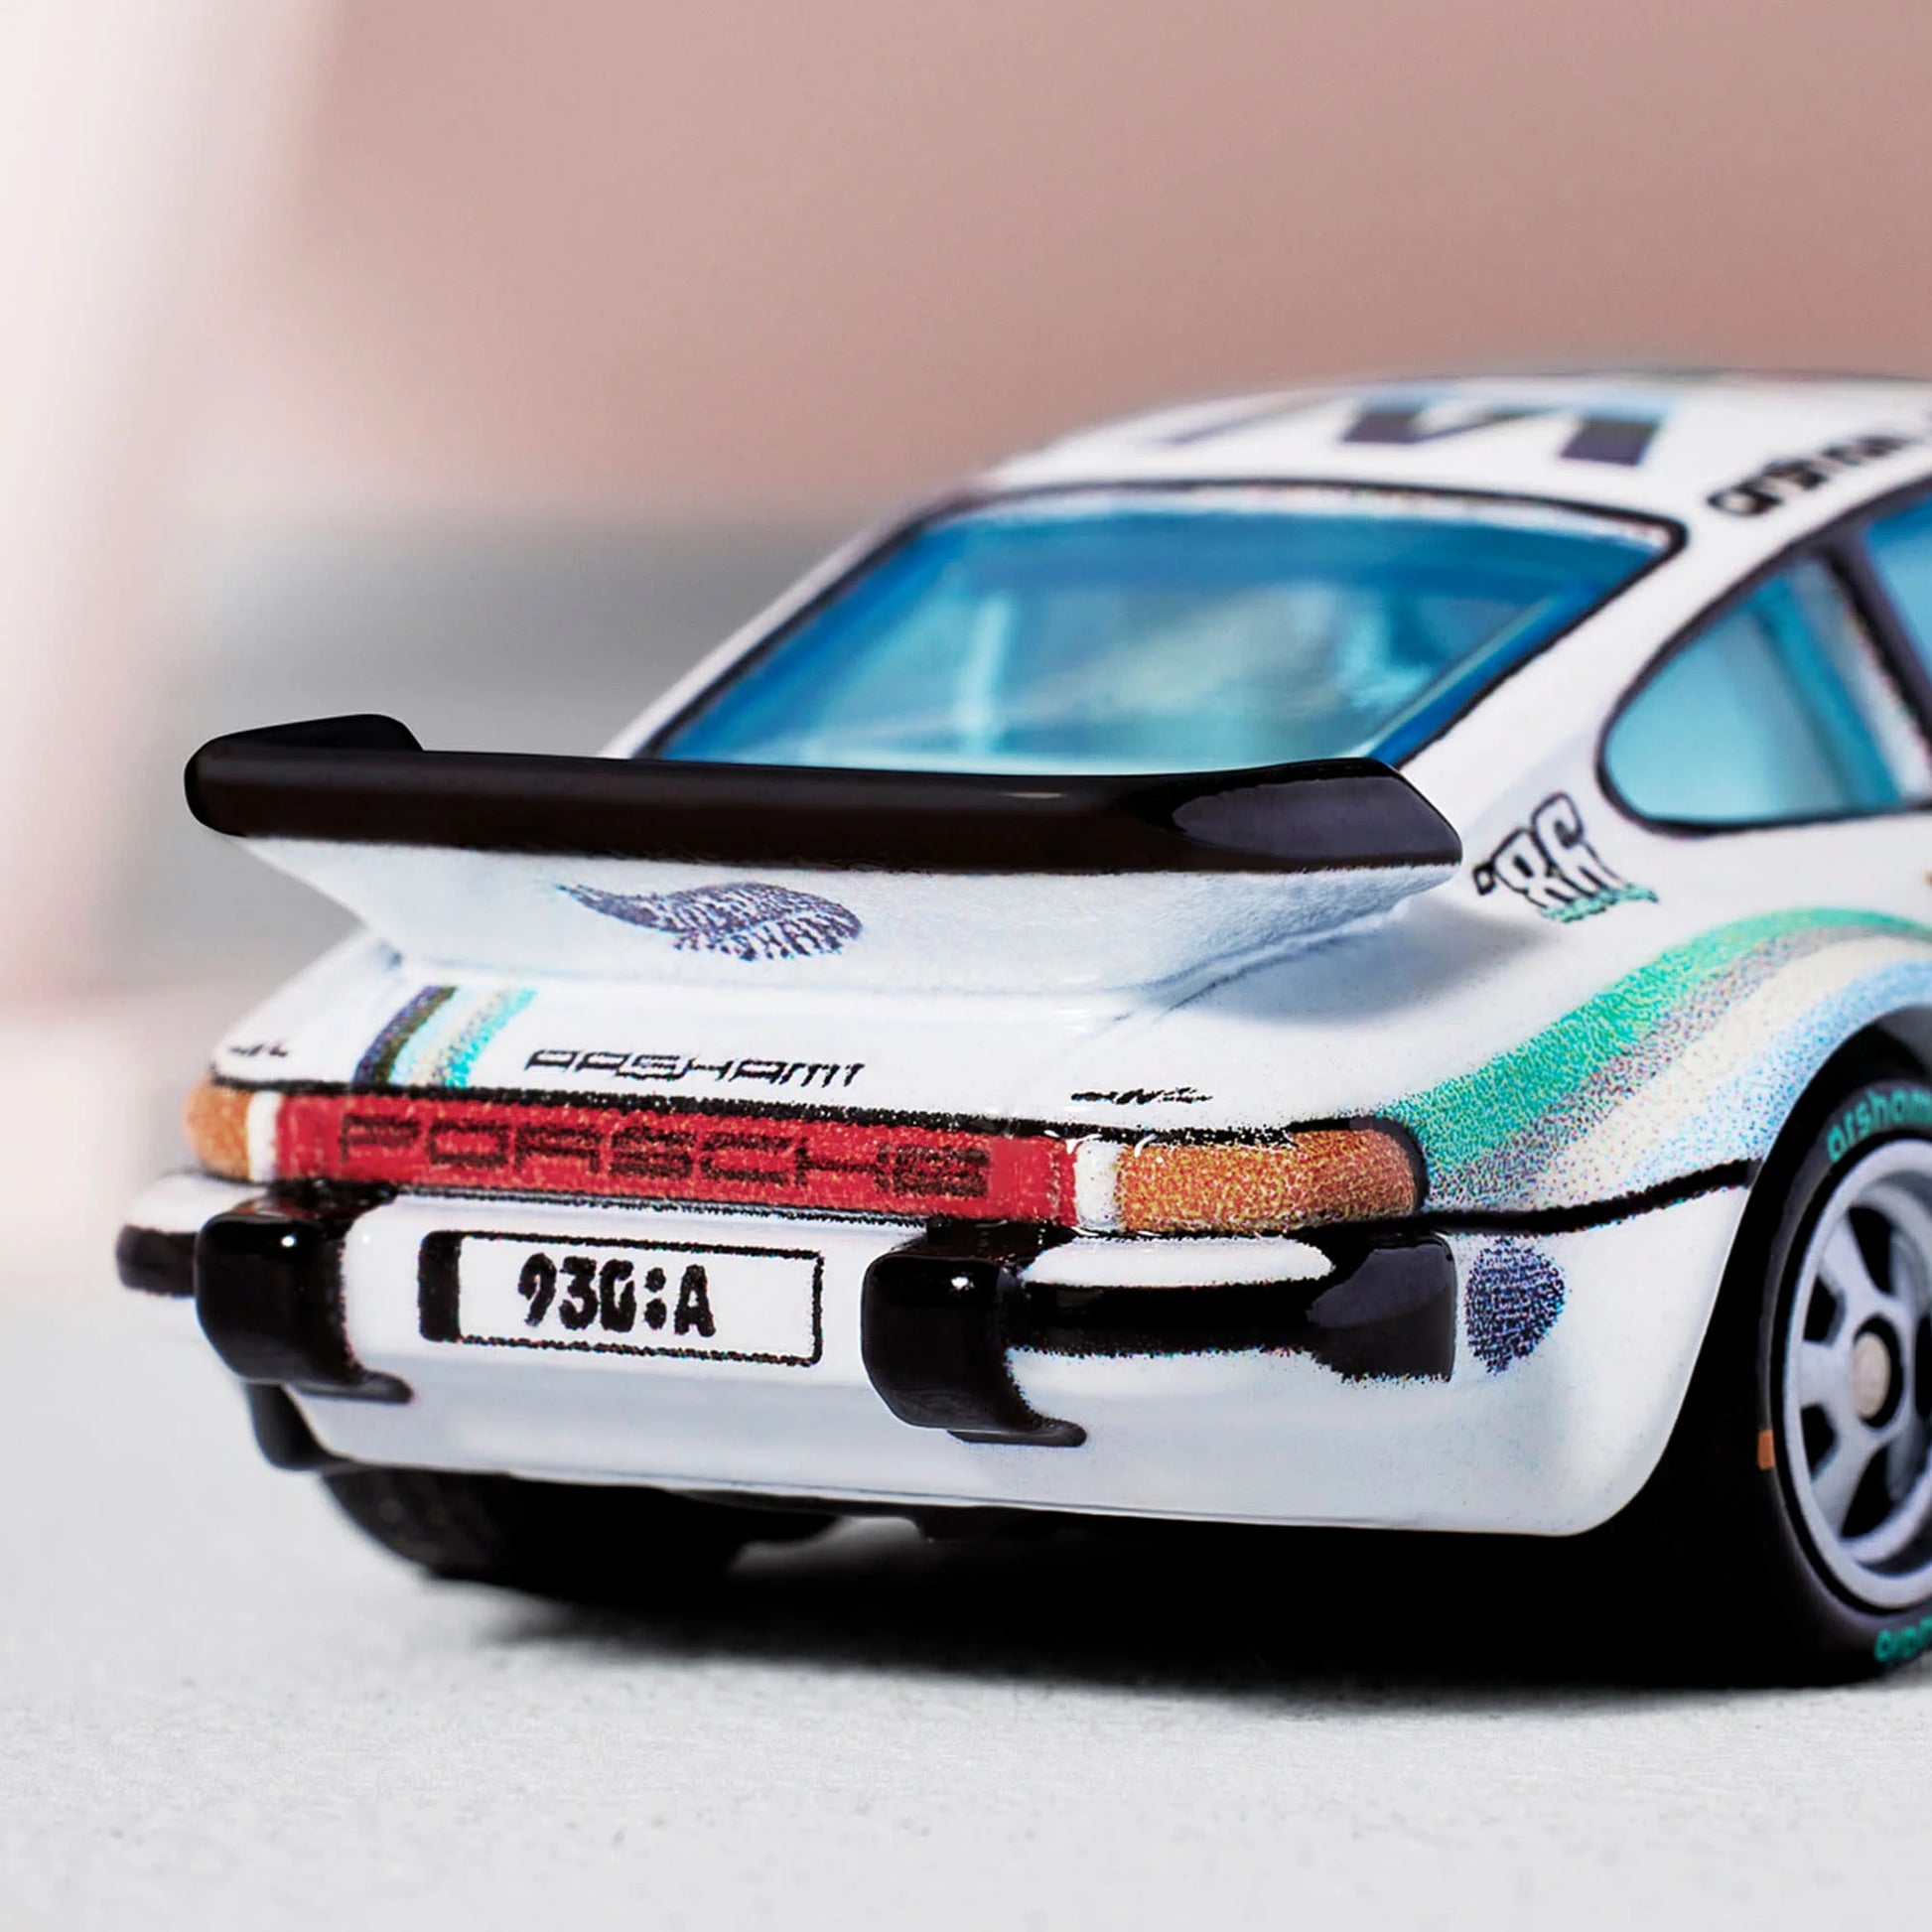 Daniel Arsham x Hot Wheels Livery Porsche 930A, 2024 Body Color: Gloss white Body Type: ZAMAC Chassis: ZAMAC Wheels: Real Riders classic 5-spoke wheels with liquid silver hubs and “arsham studio” tampo Window Color: Lightly tinted Interior Color: Plastic replica of 1:1 version’s Italian leather and stonewashed canvas Scale 1:64 Includes sealing label and Certificate of Authenticity Packaged in a collector display case with simulated concrete base.